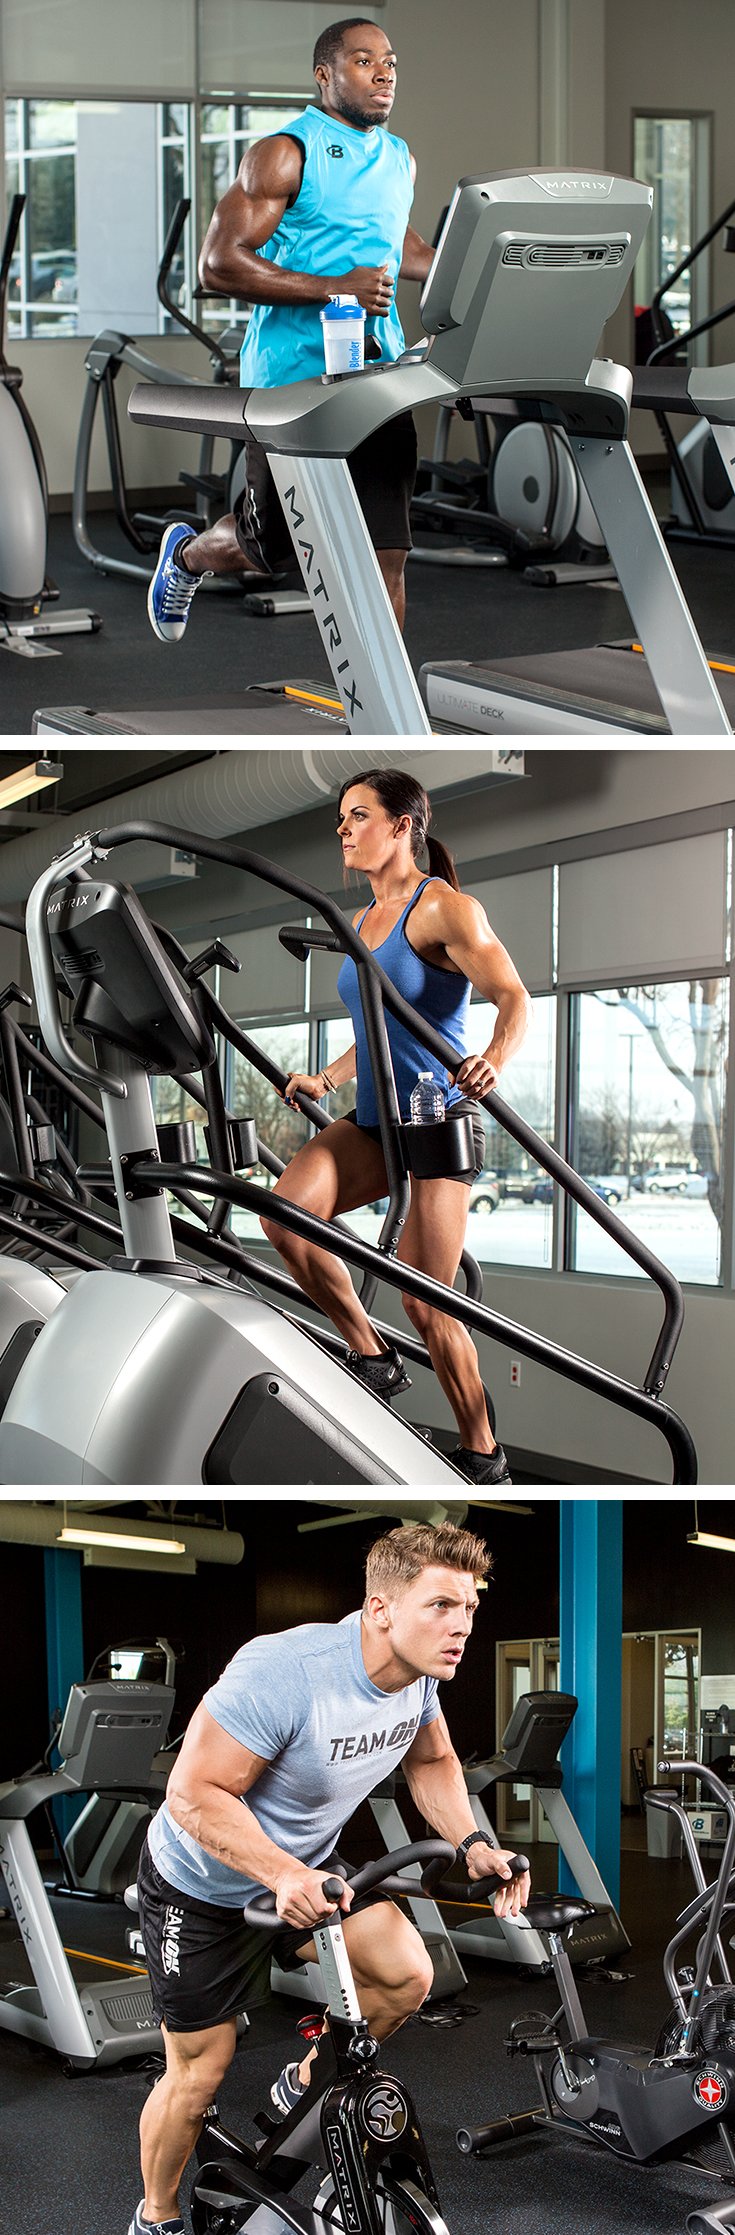 Weight loss: Which cardio machine is the best in the gym? - Times of India